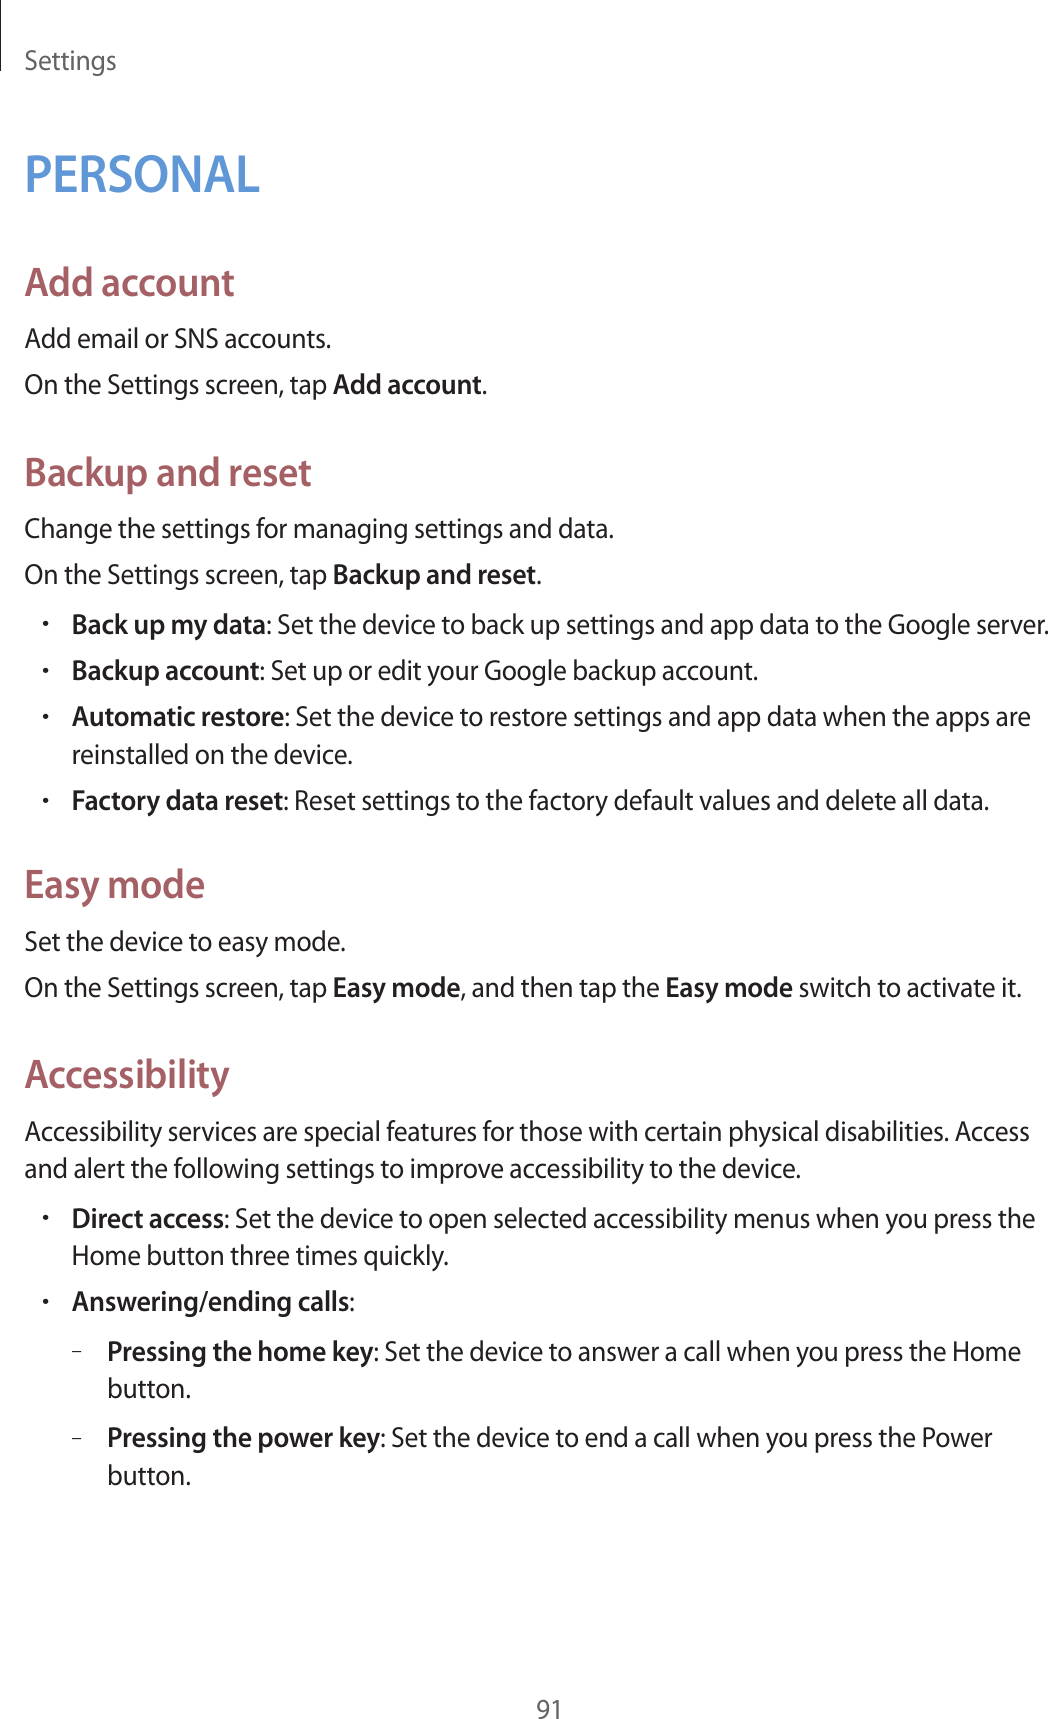 Settings91PERSONALAdd accountAdd email or SNS accounts.On the Settings screen, tap Add account.Backup and resetChange the settings for managing settings and data.On the Settings screen, tap Backup and reset.•Back up my data: Set the device to back up settings and app data to the Google server.•Backup account: Set up or edit your Google backup account.•Automatic restore: Set the device to restore settings and app data when the apps are reinstalled on the device.•Factory data reset: Reset settings to the factory default values and delete all data.Easy modeSet the device to easy mode.On the Settings screen, tap Easy mode, and then tap the Easy mode switch to activate it.AccessibilityAccessibility services are special features for those with certain physical disabilities. Access and alert the following settings to improve accessibility to the device.•Direct access: Set the device to open selected accessibility menus when you press the Home button three times quickly.•Answering/ending calls:–Pressing the home key: Set the device to answer a call when you press the Home button.–Pressing the power key: Set the device to end a call when you press the Power button.